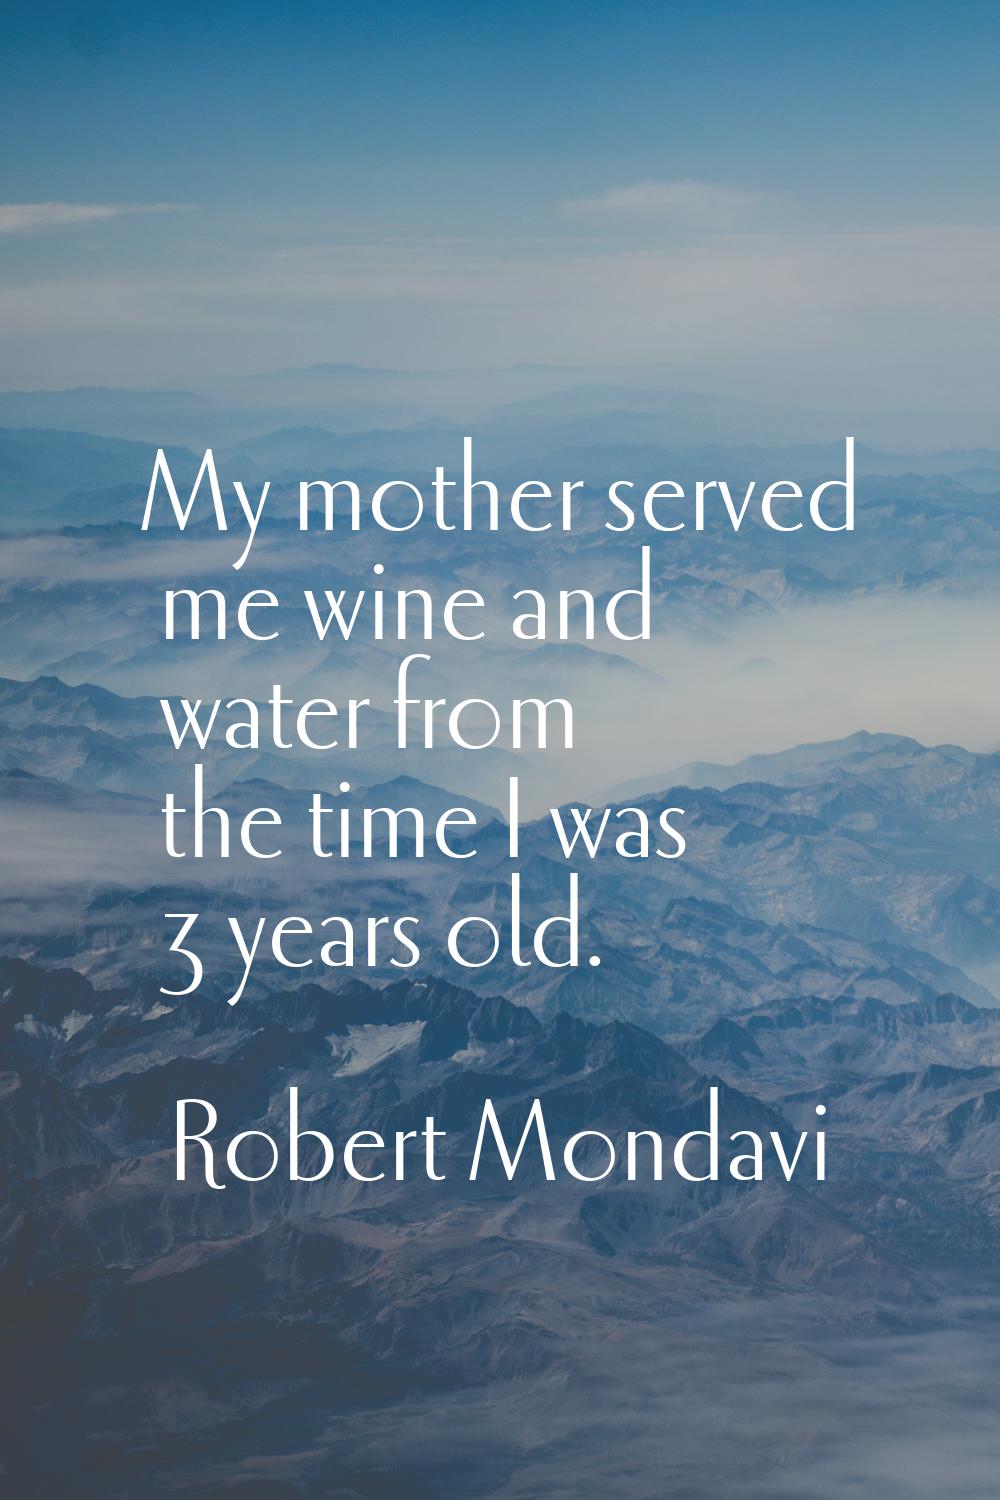 My mother served me wine and water from the time I was 3 years old.